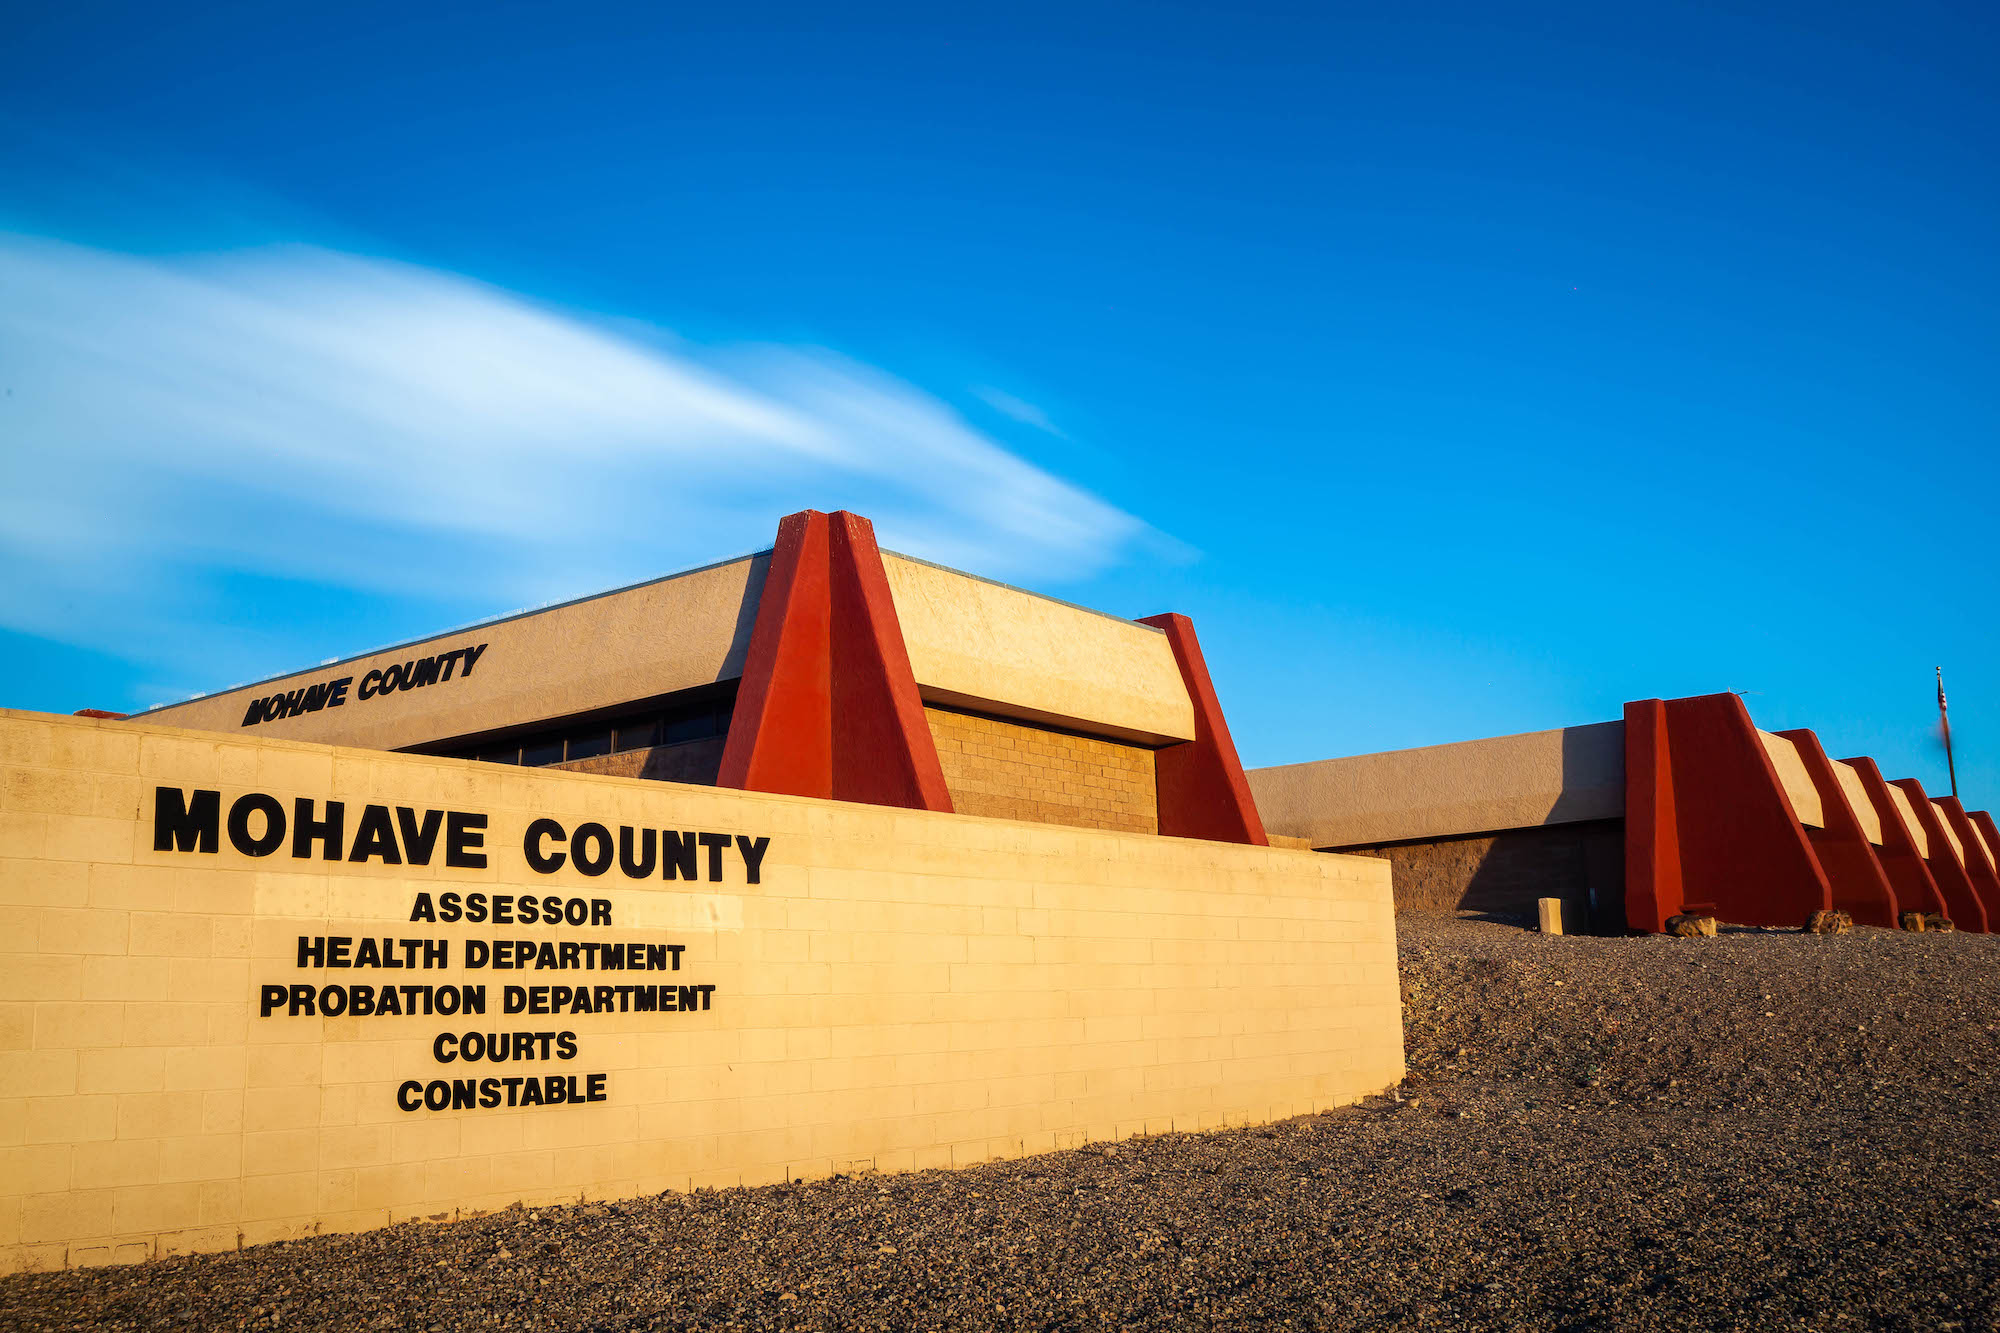 Justice Courts The Judicial Branch of Arizona